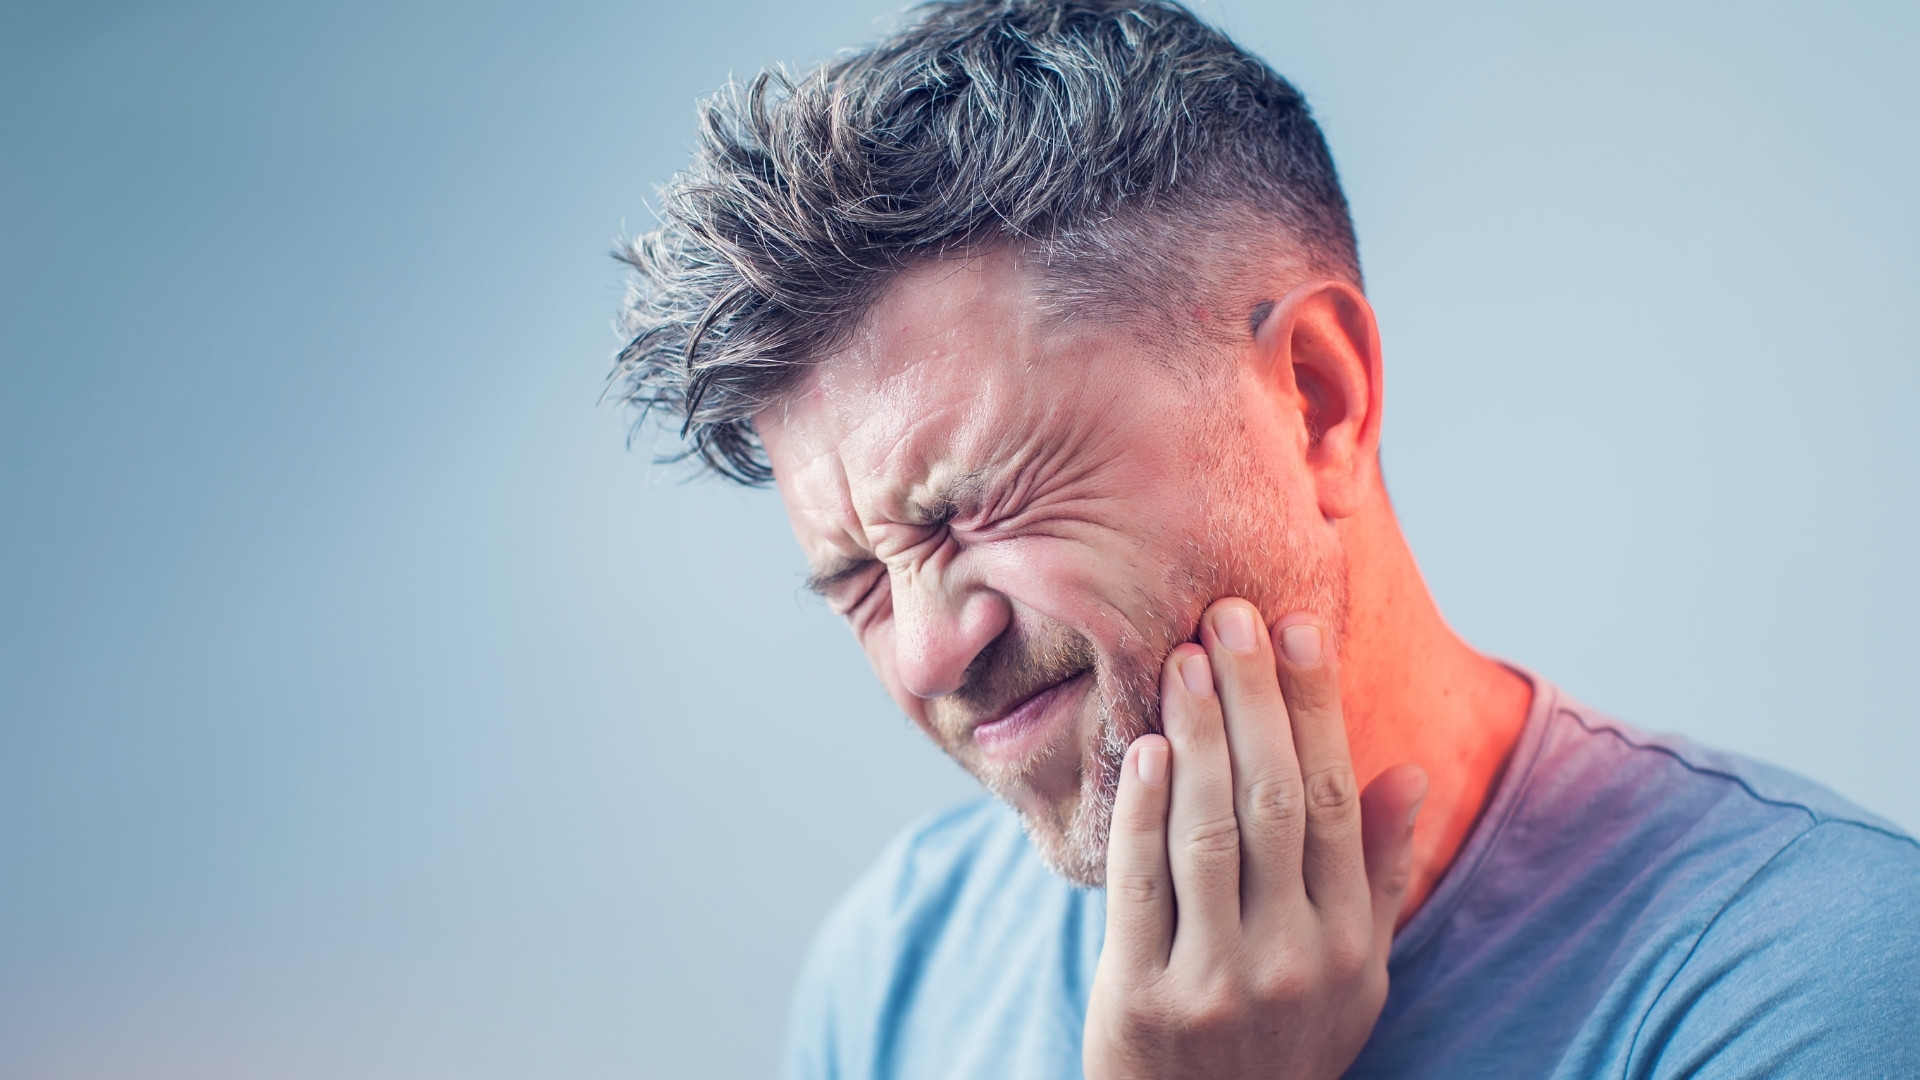 oral trouble - tooth pain